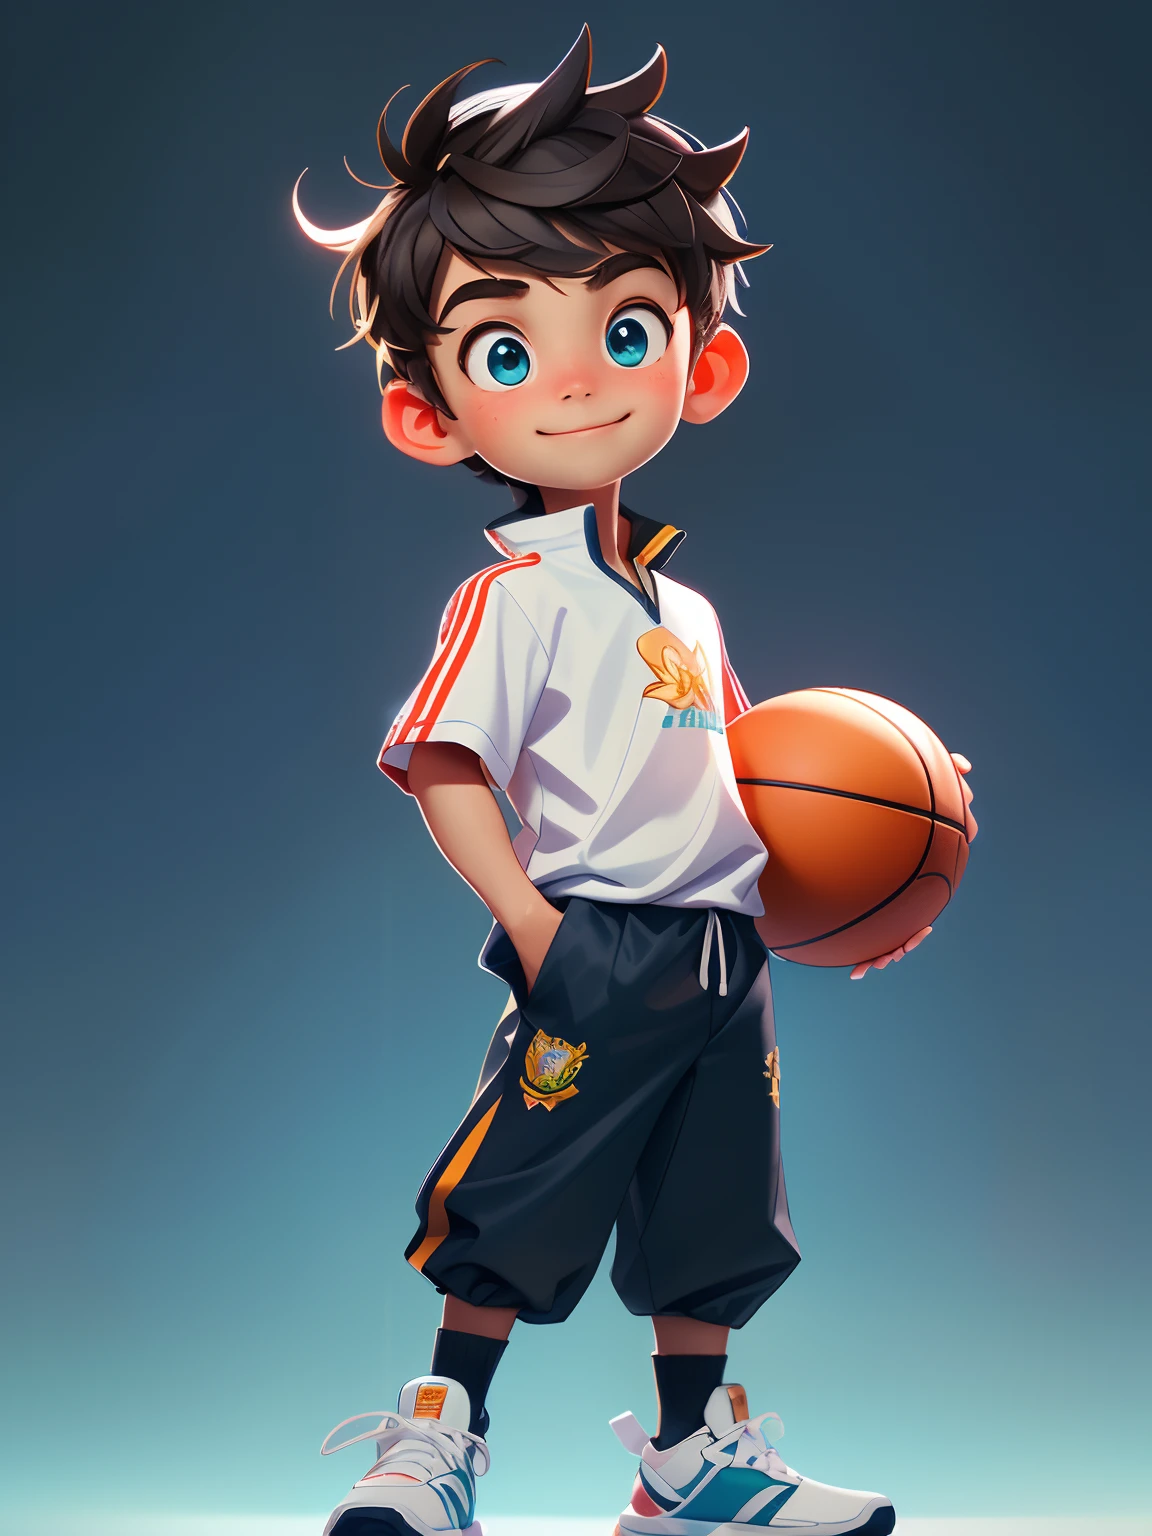 10 year old boy，Towards the future，tmasterpiece，HighestQuali，（（Photorealsitic：1.4））tmasterpiece，（tmasterpiece，Best quality at best）Five cute little boys，Wearing a red and white jersey，Black basketball sneakers，basketball ball，Elaborate Eyes，happy grin，clean backdrop，Delicate sheen，8K，C4D，rendering，illustratio，very delicate beautiful，highly detailed CG，8K wallpaper，astounding，finely detailled，highly detailed CG Unity 8K wallpapers，hugefilesize，super detailing，超A high resolution，A high resolution，Very detailed，（（very detailed eyes and faces）），Beautiful and delicate eyes，Very delicate face， perfect litthing，Facial light，Natural colors，（（10-year-old boy）），From the front light